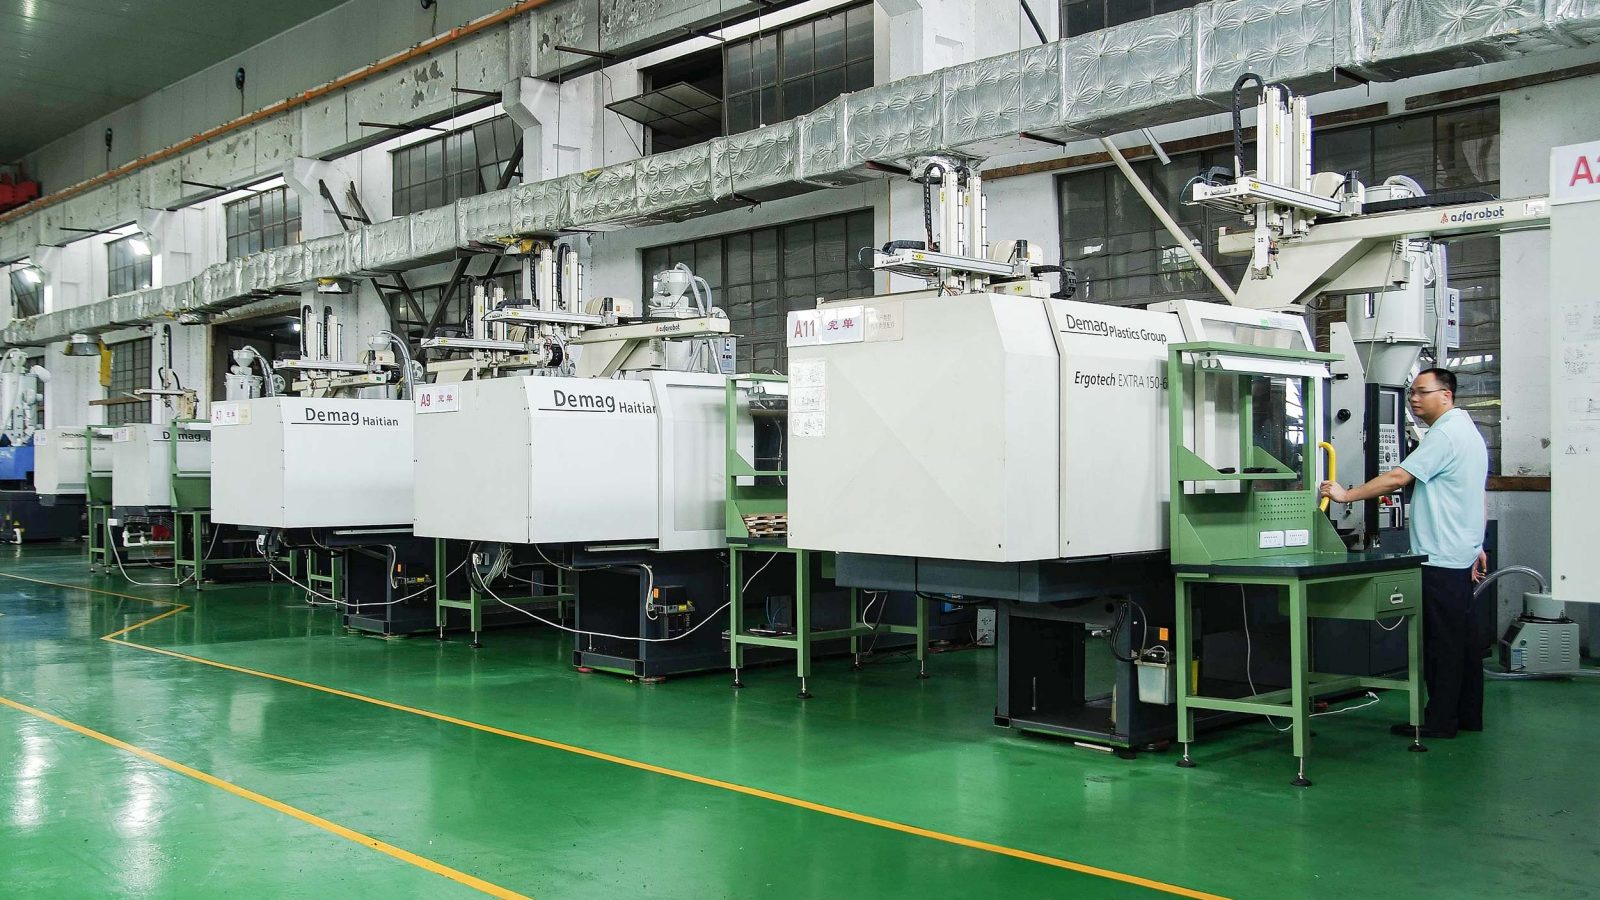 Injection molding contract manufacturing workshop with several machines in a row